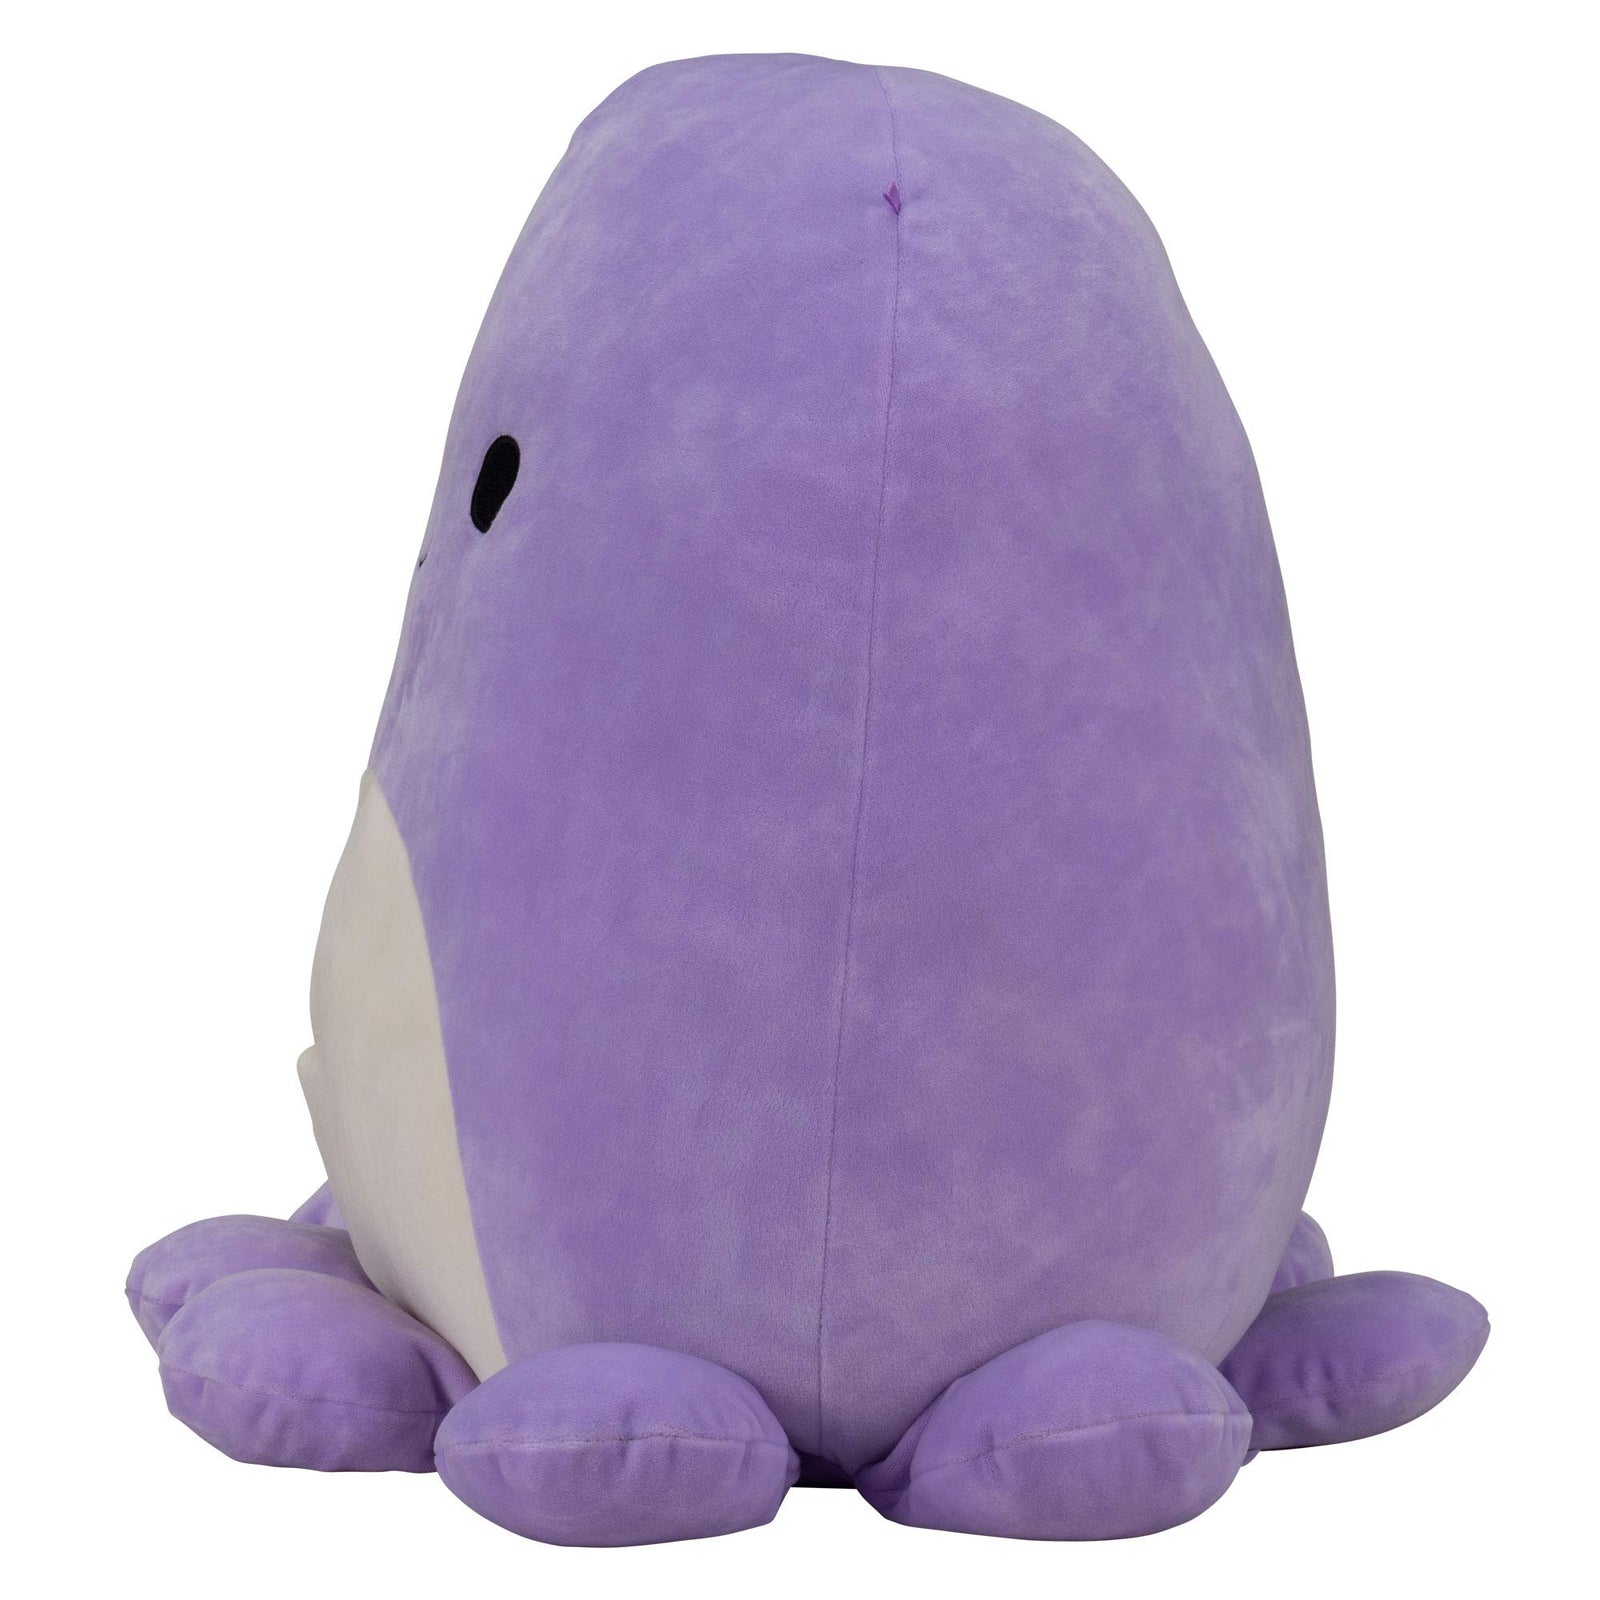 Squishmallow Official Kellytoy Plush 16" Violet The Octopus- Ultrasoft Stuffed Animal Plush Toy